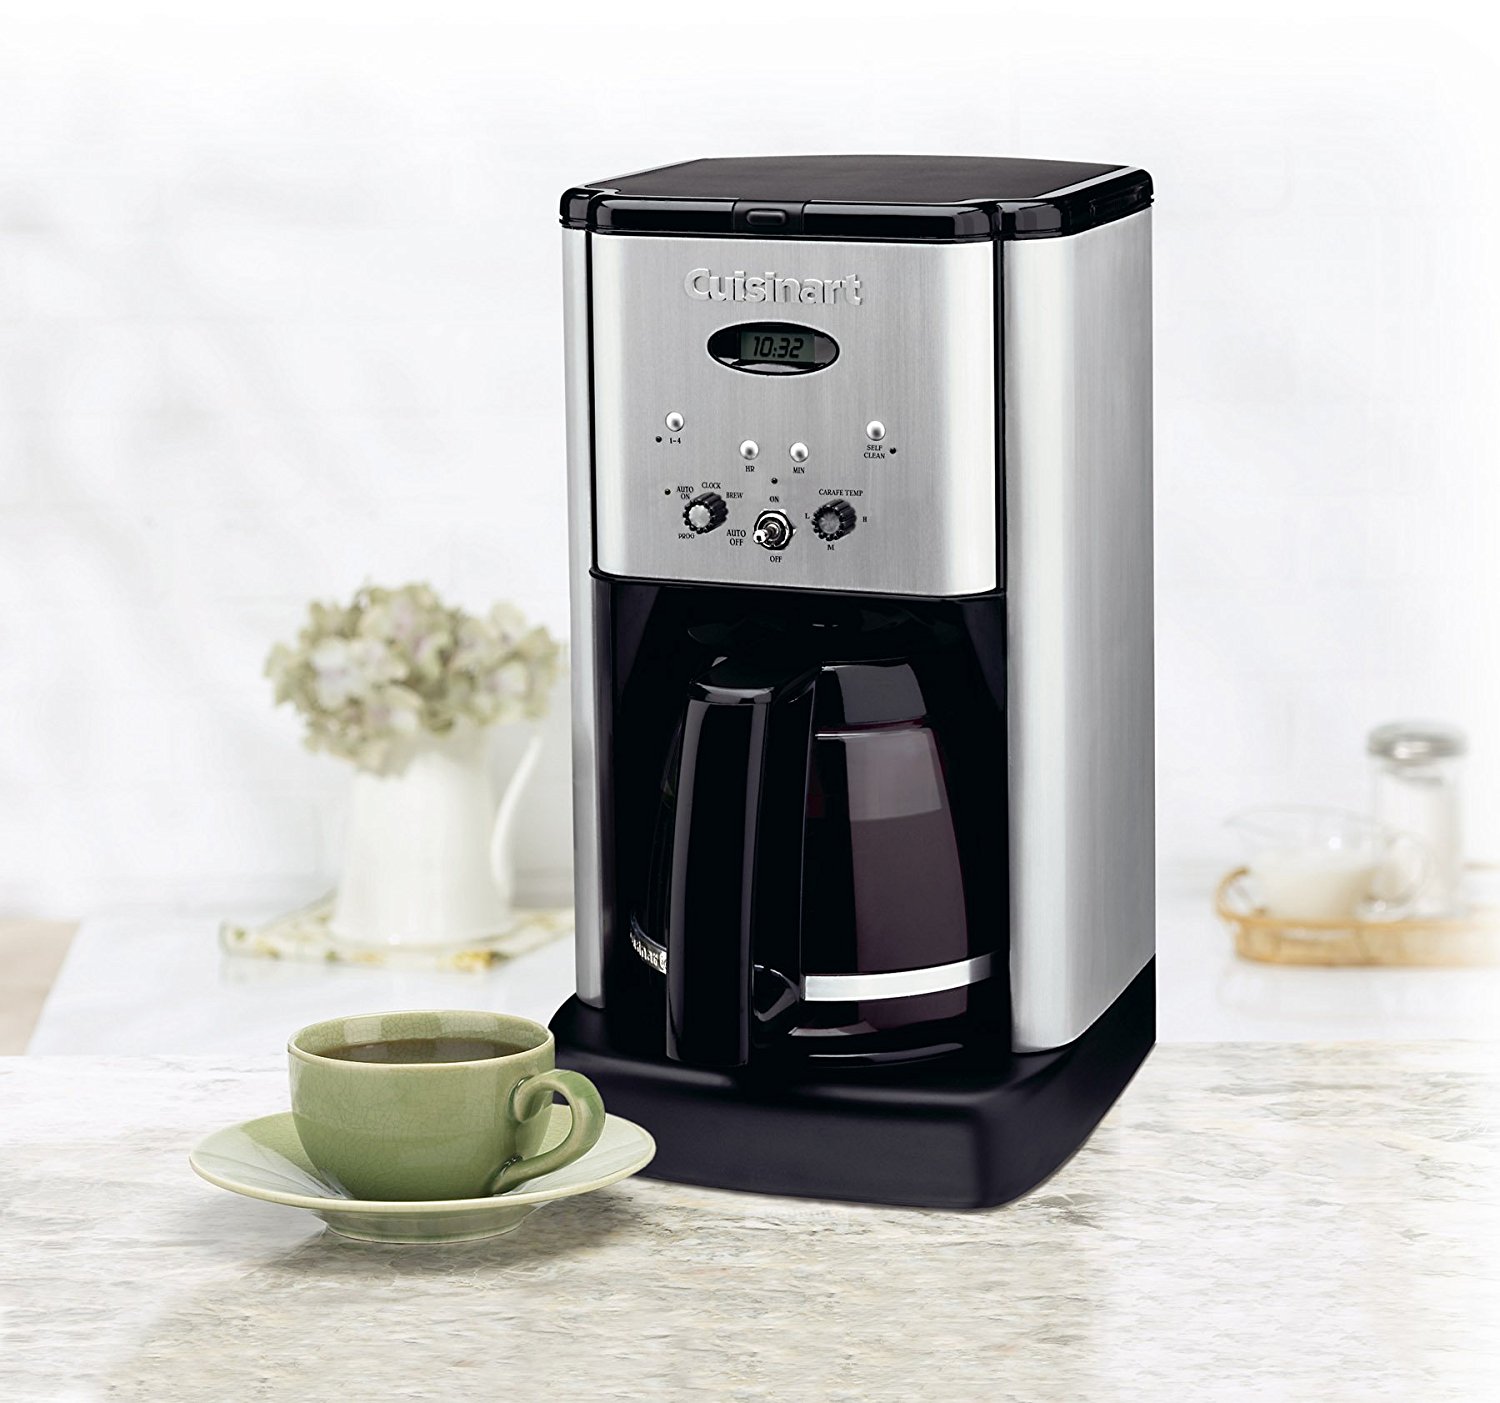 Which Cuisinart coffee makers are the best brewers?